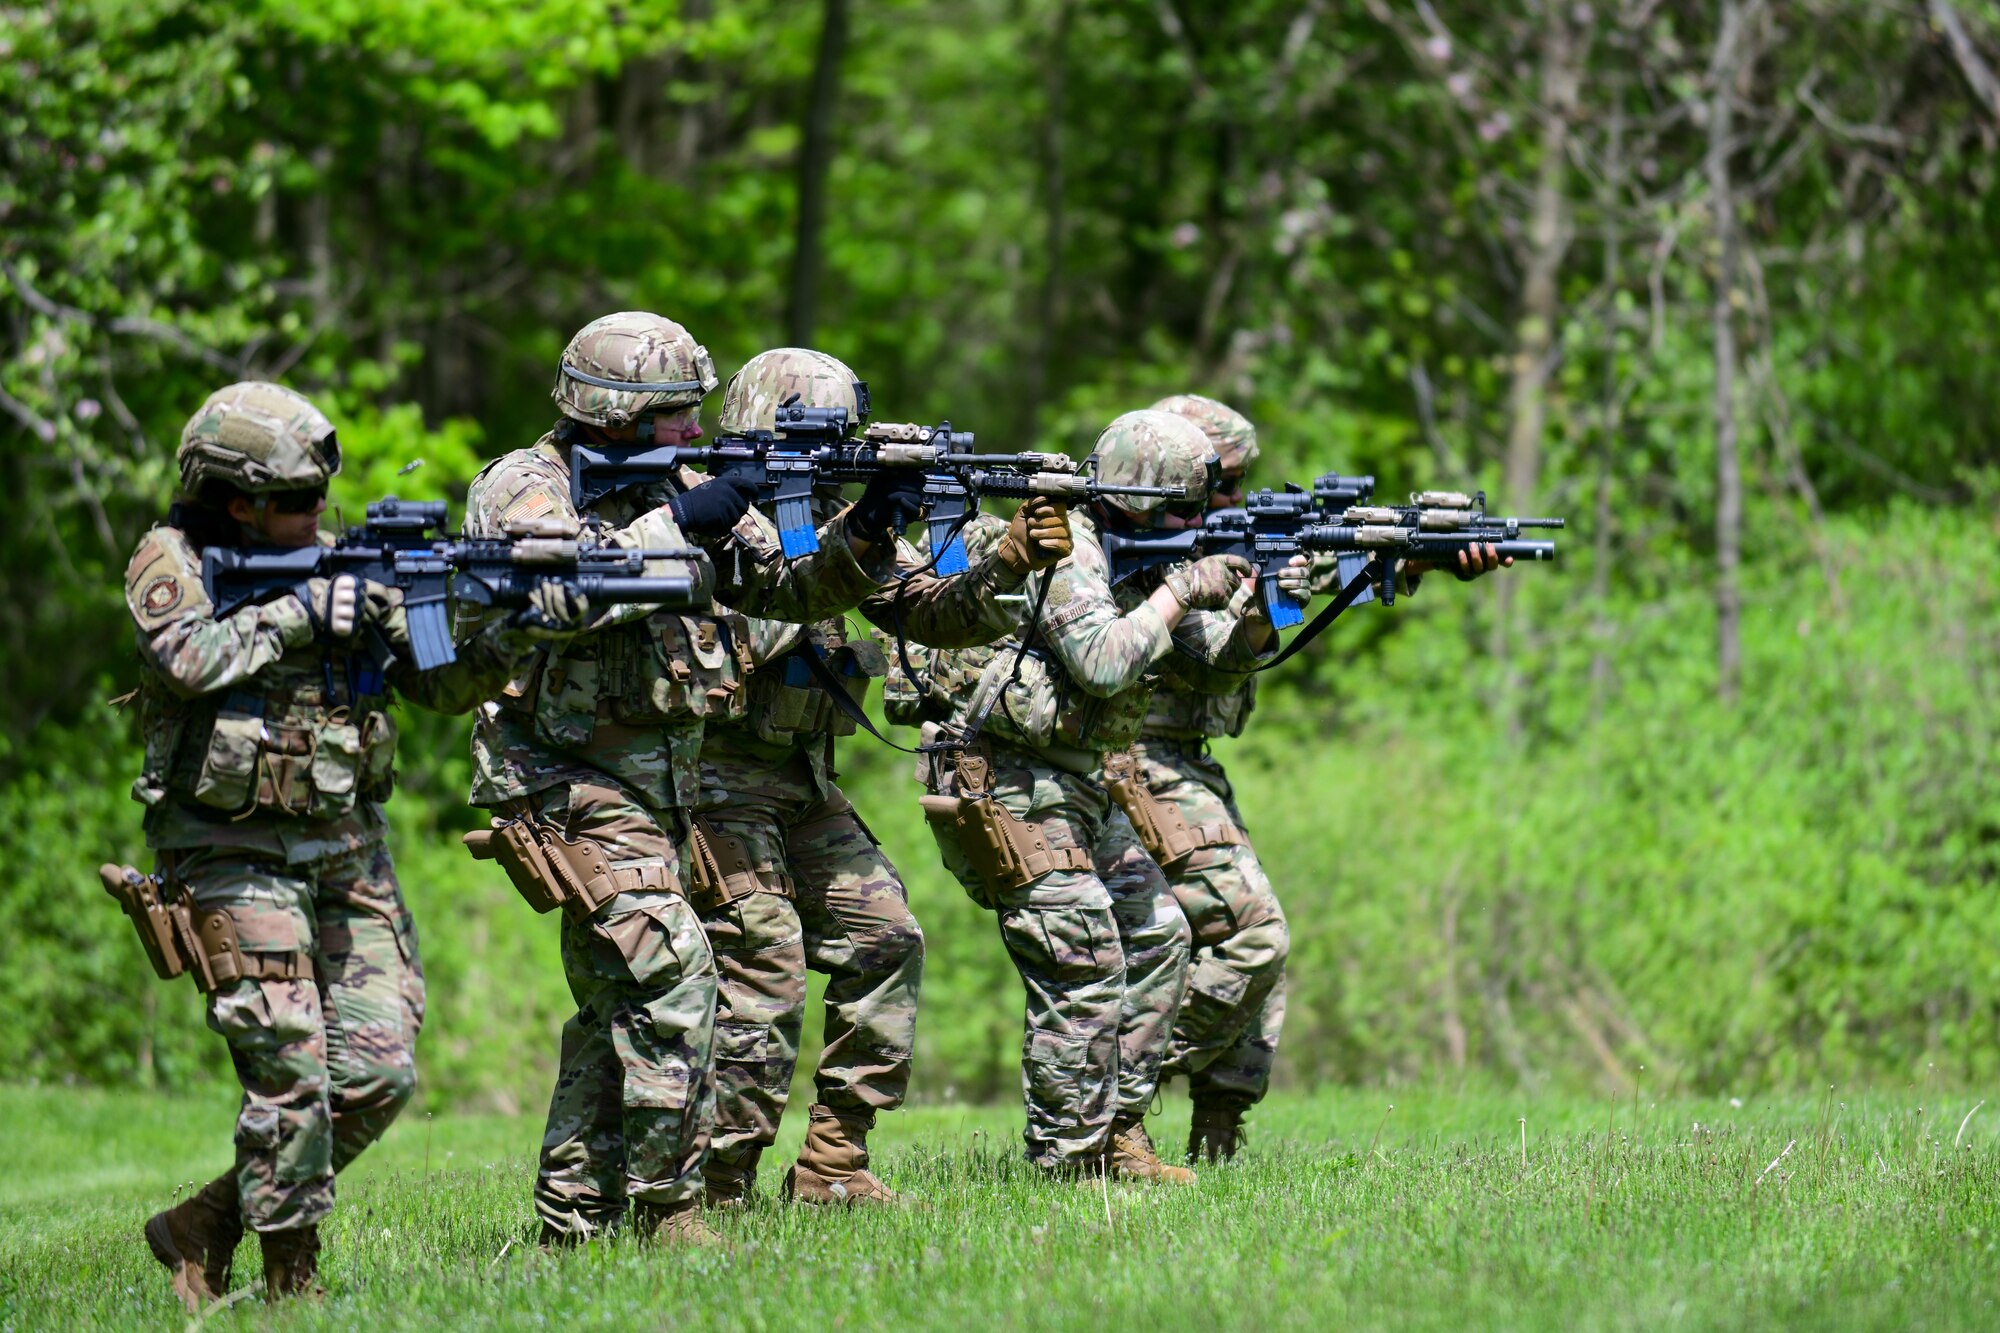 Members of the 403rd Security Forces Squadron from Keesler Air Force Base, Mississippi, completed the Integrated Defense Leadership Course at Youngstown Air Reserve Station, Ohio, in May 2022.